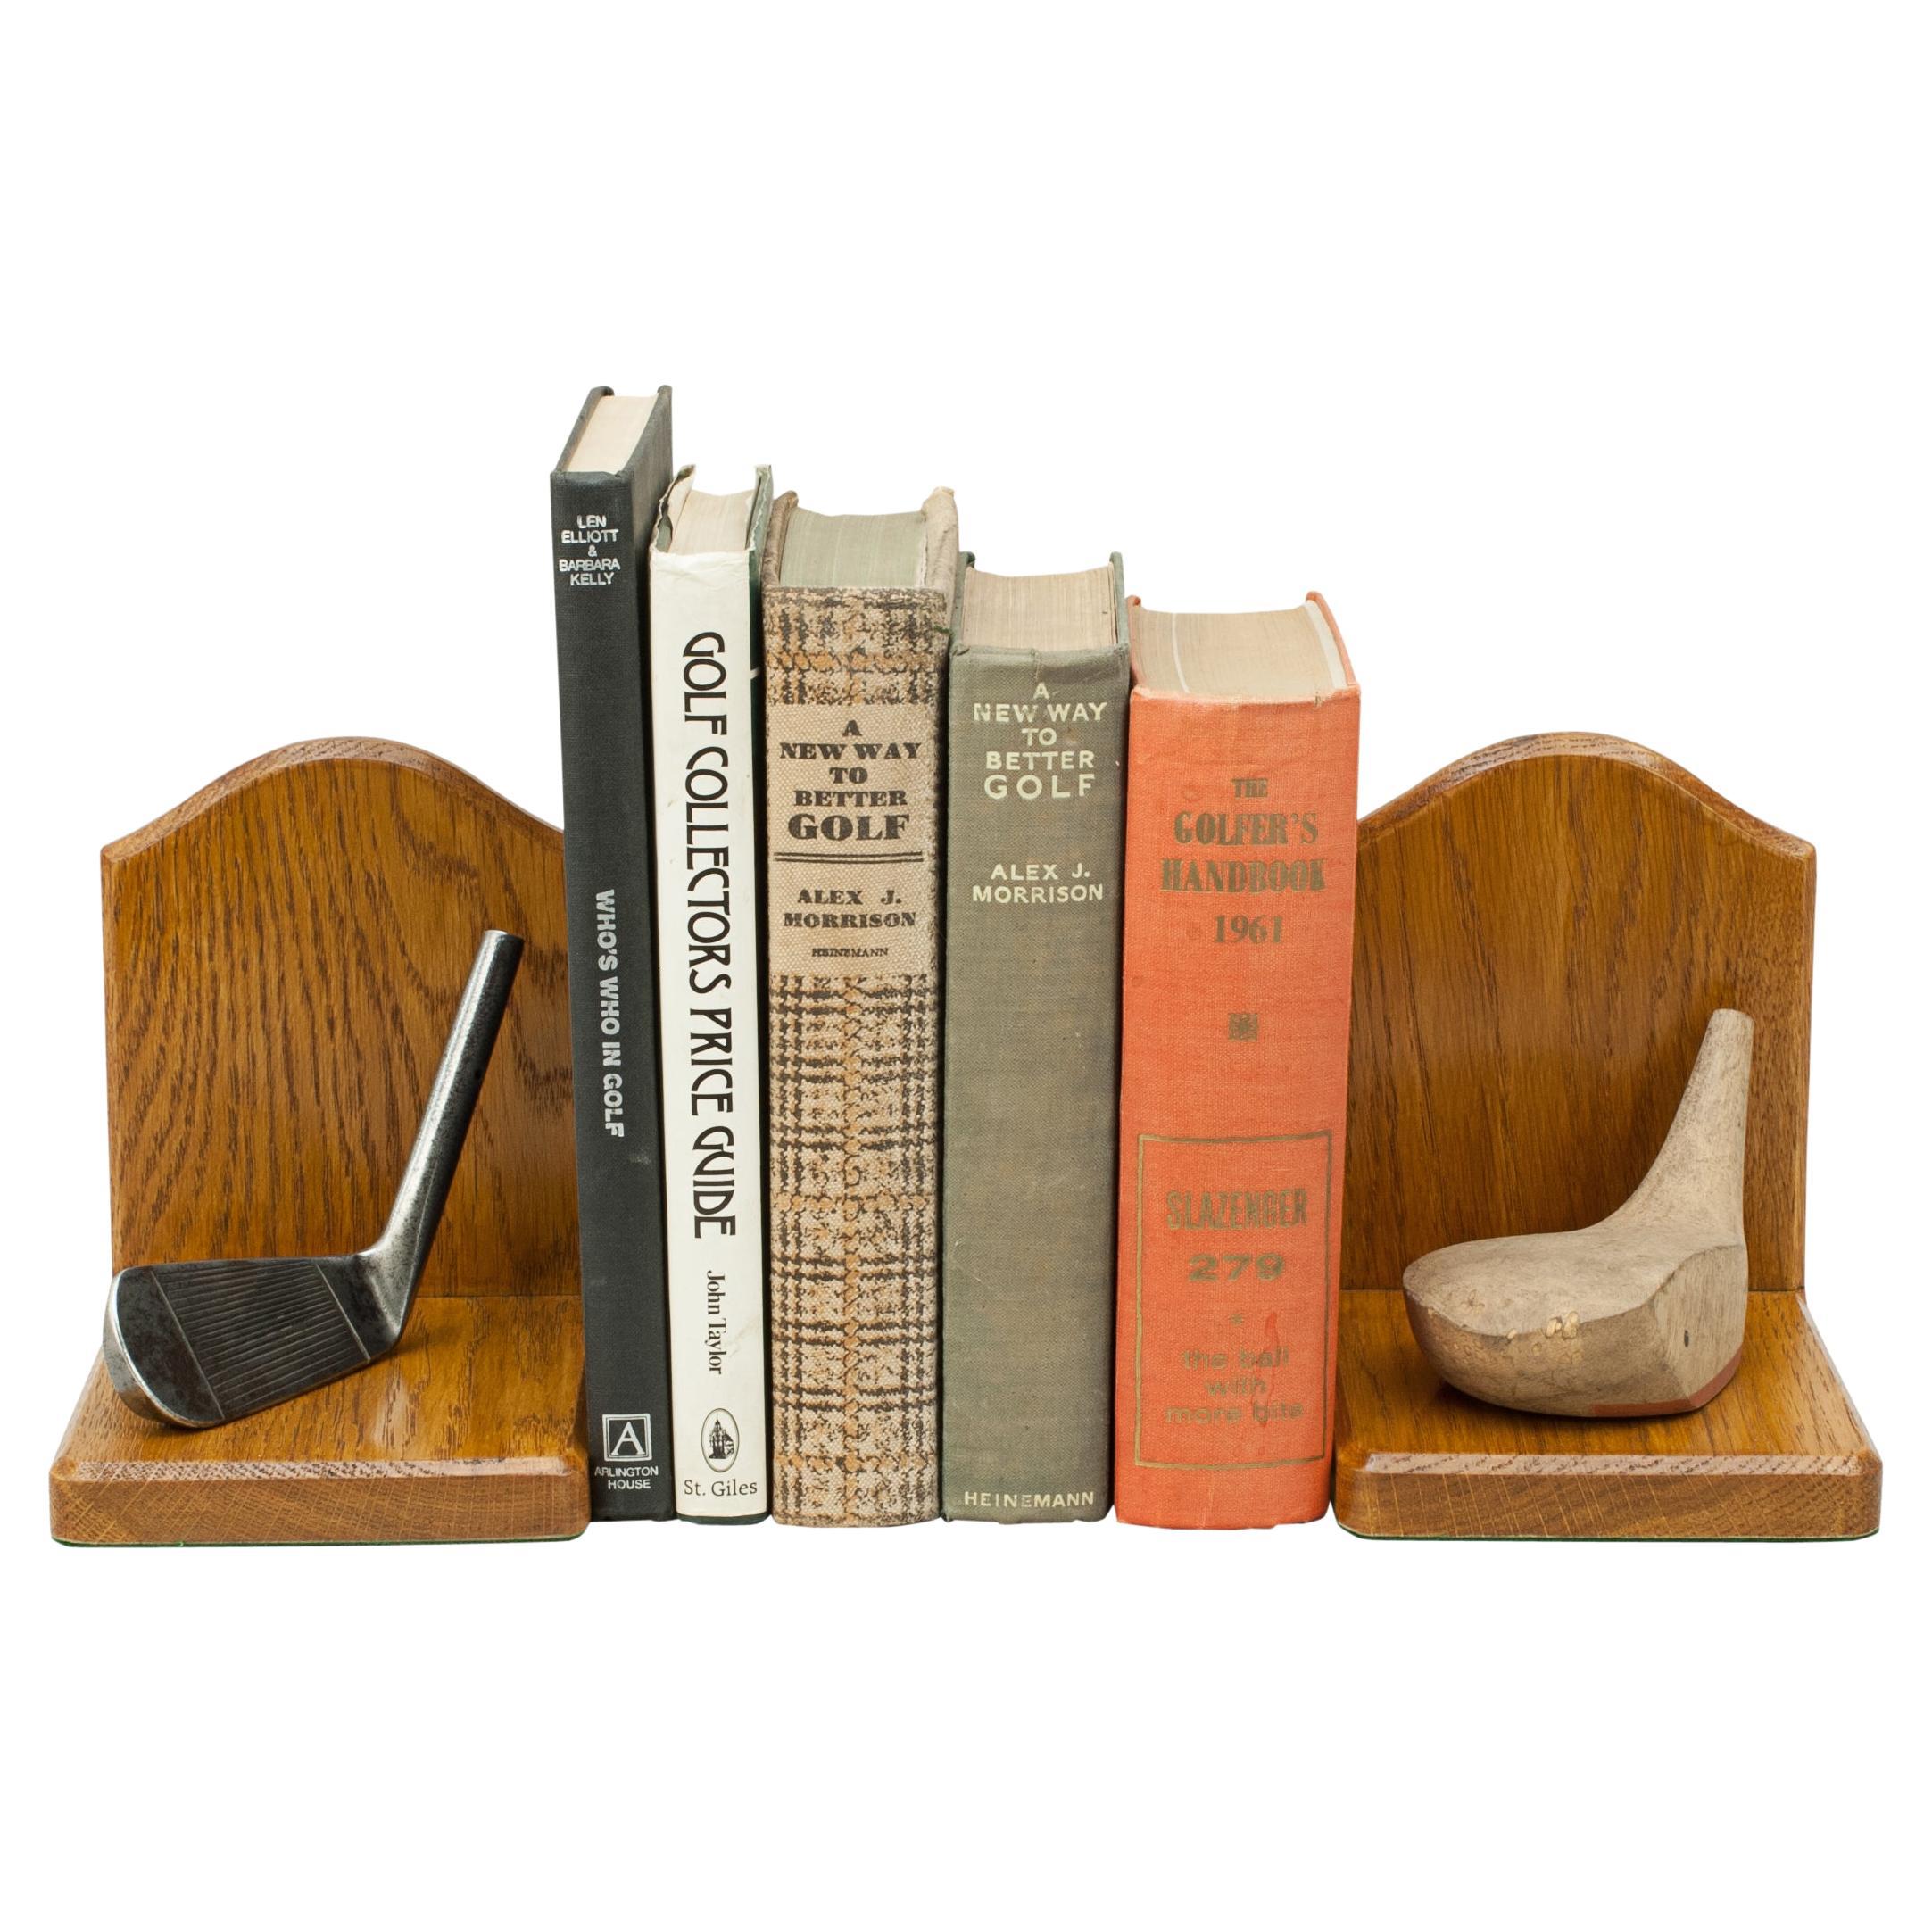 Cricket Shelf Tidy Heavy Resin Bookends Vintage Style BRAND NEW 